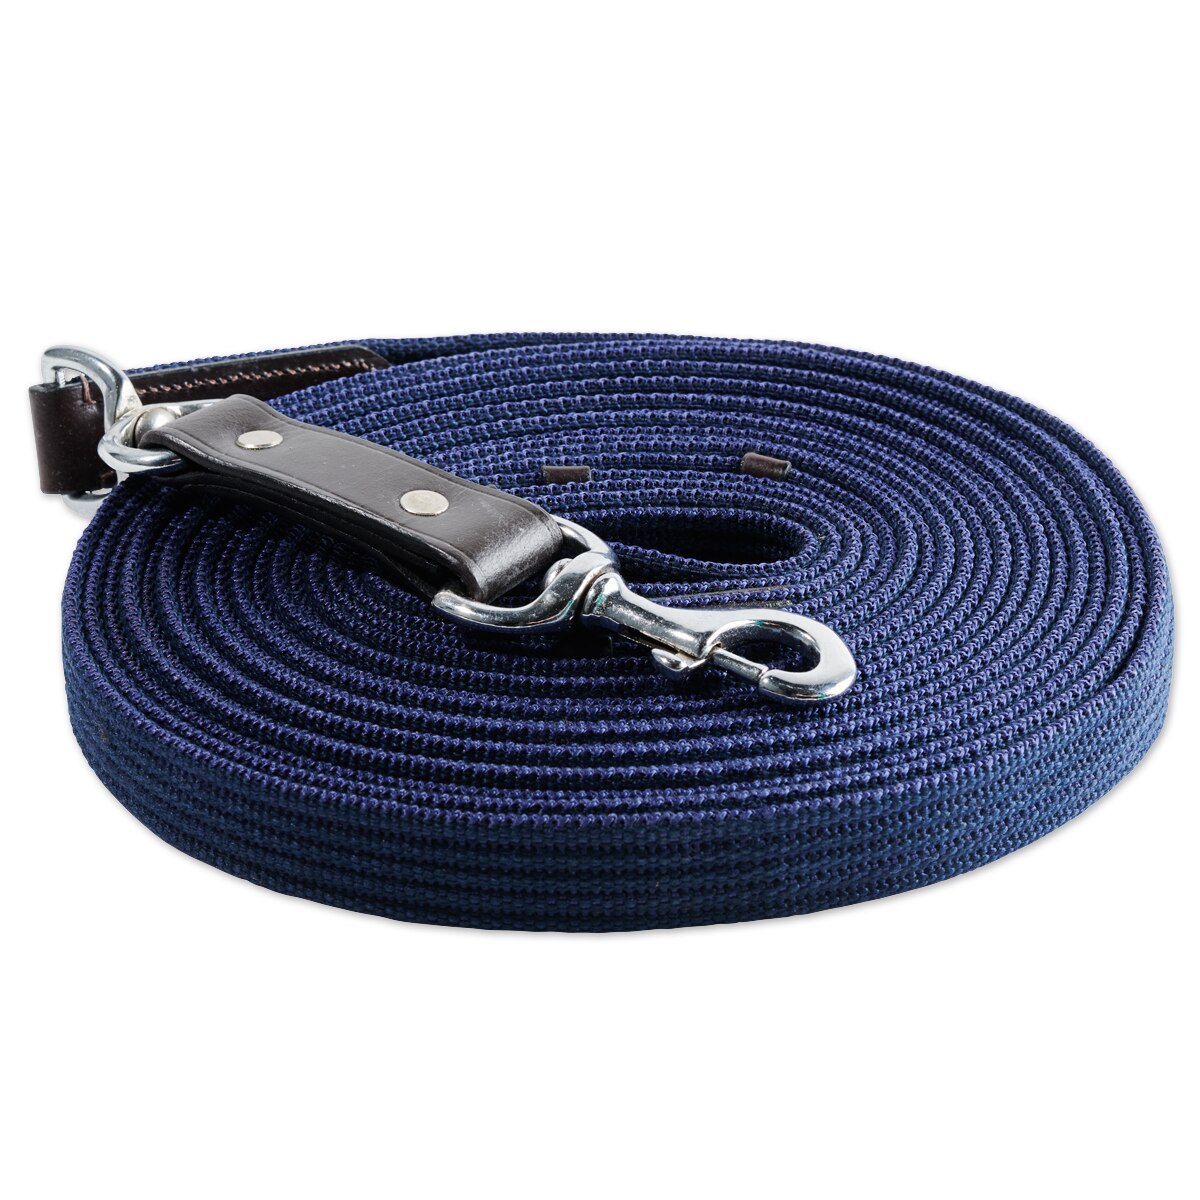 25 Foot Cotton with Brass Plated Chain Lunge Line 